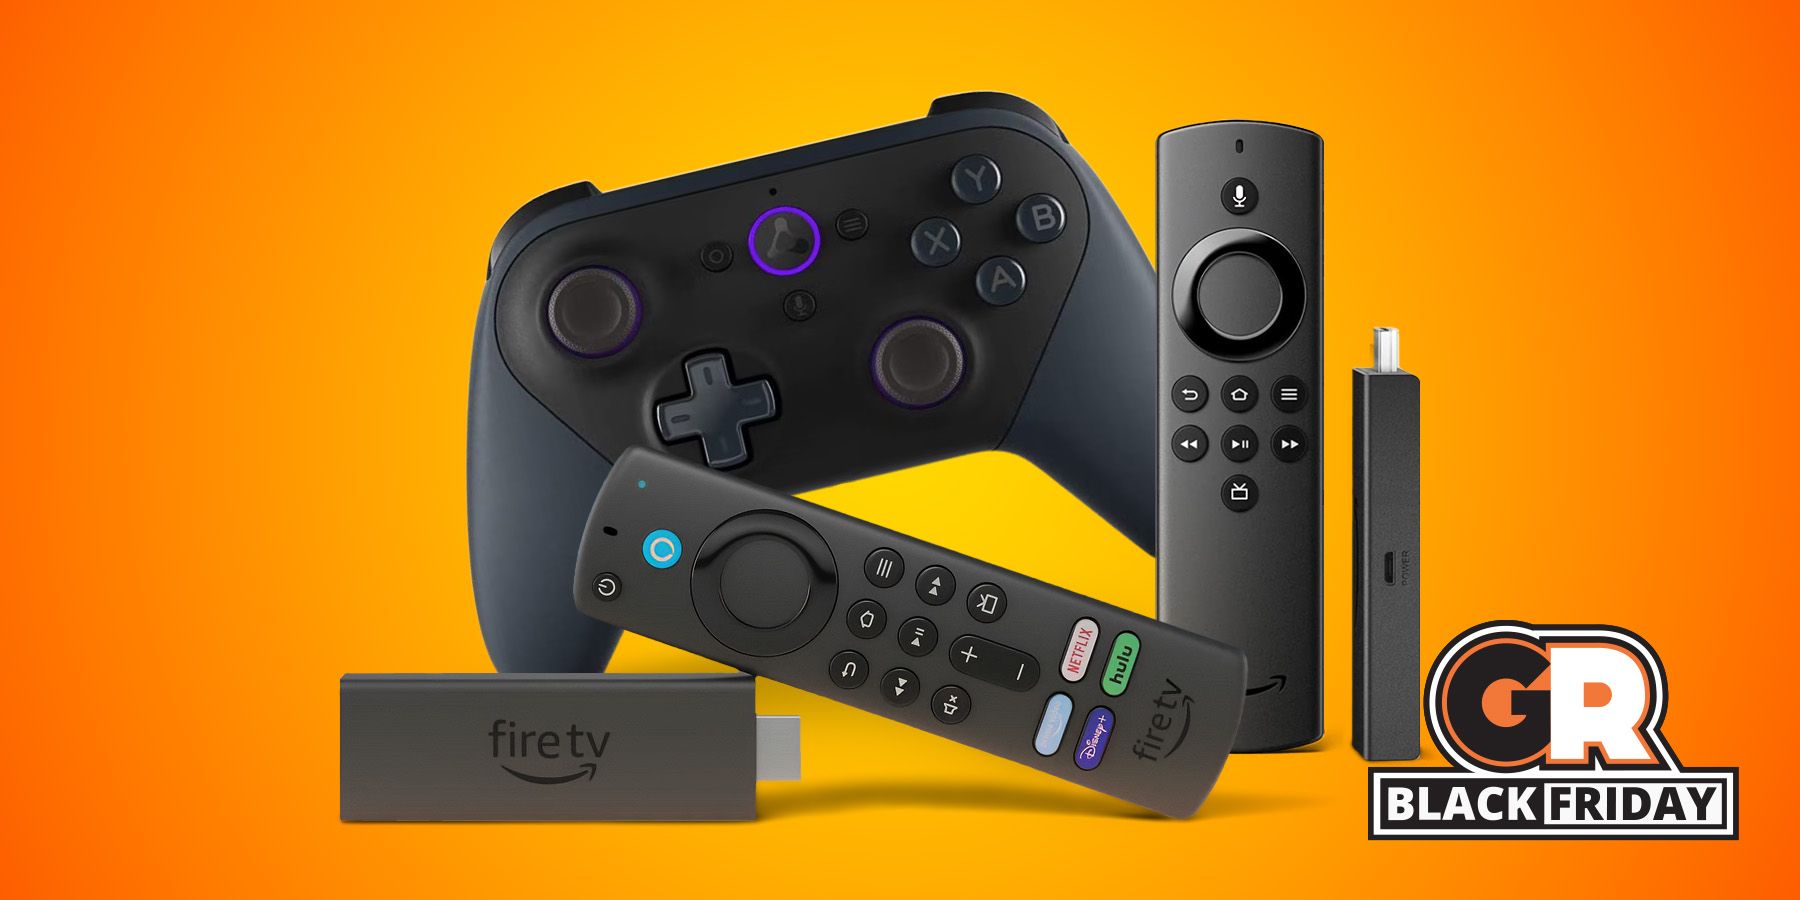 Amazon Early Black Friday Deal: Fire TV Gaming Bundles